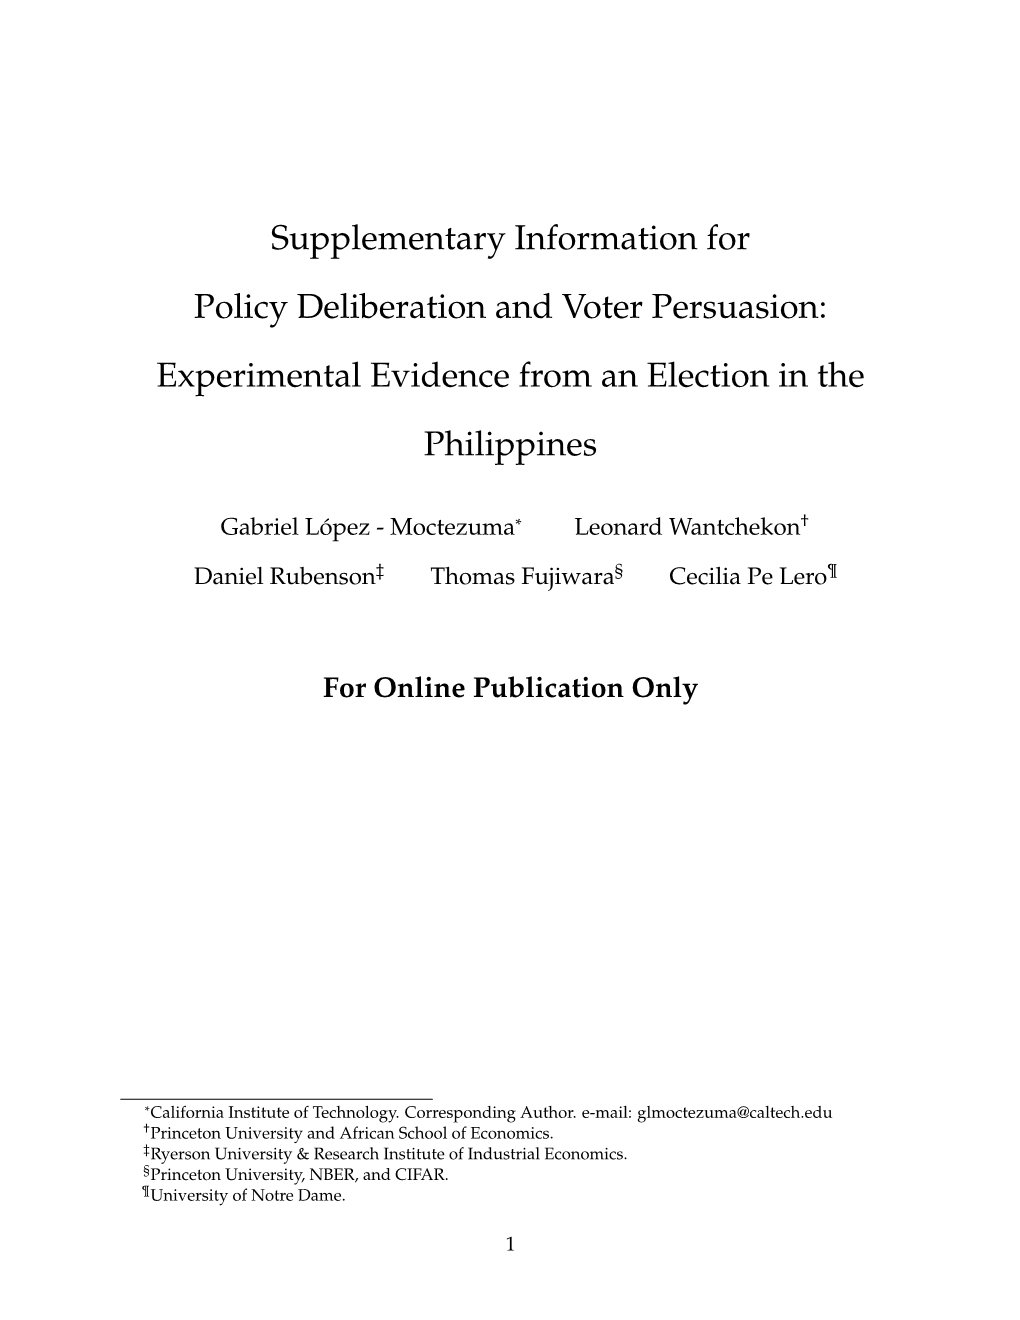 Policy Deliberation and Voter Persuasion: Experimental Evidence from an Election in the Philippines